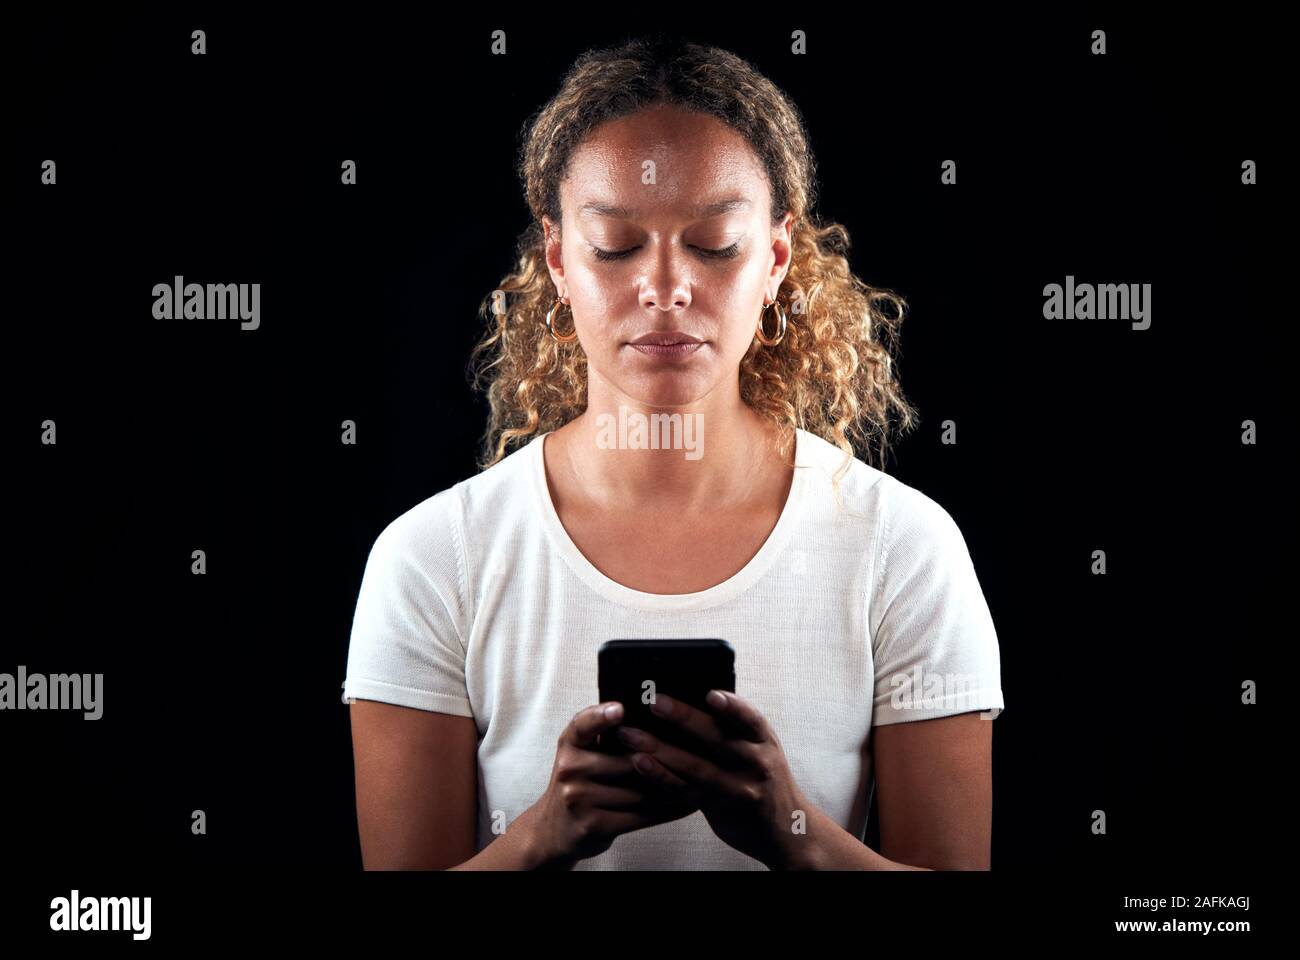 Studio Shot Of Unhappy Woman Holding Mobile Phone Being Bullied Online Stock Photo